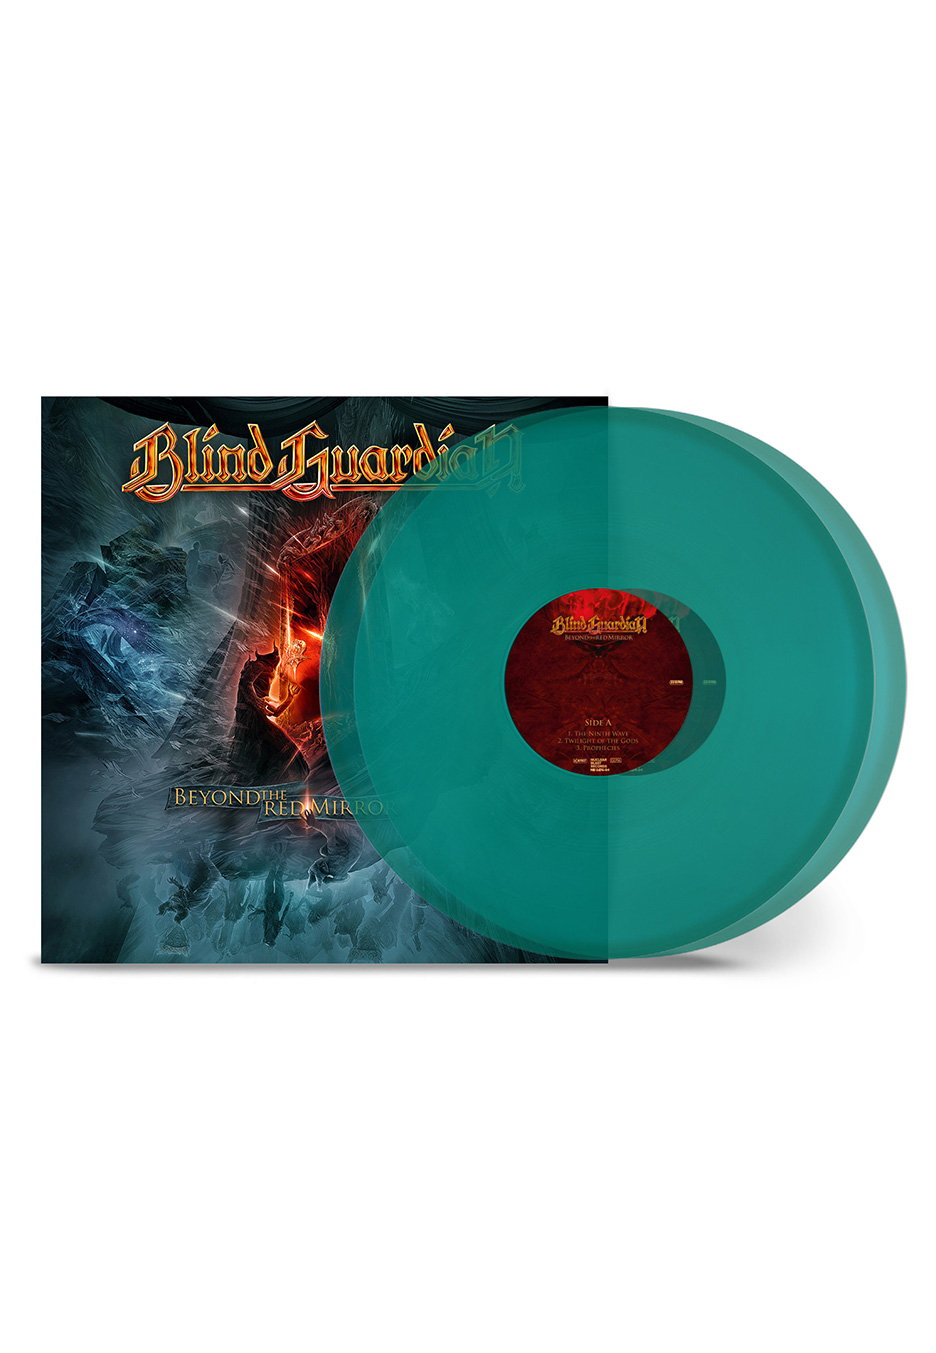 Blind Guardian - Beyond The Red Mirror Transparent Green Ltd. - Colored 2 Vinyl